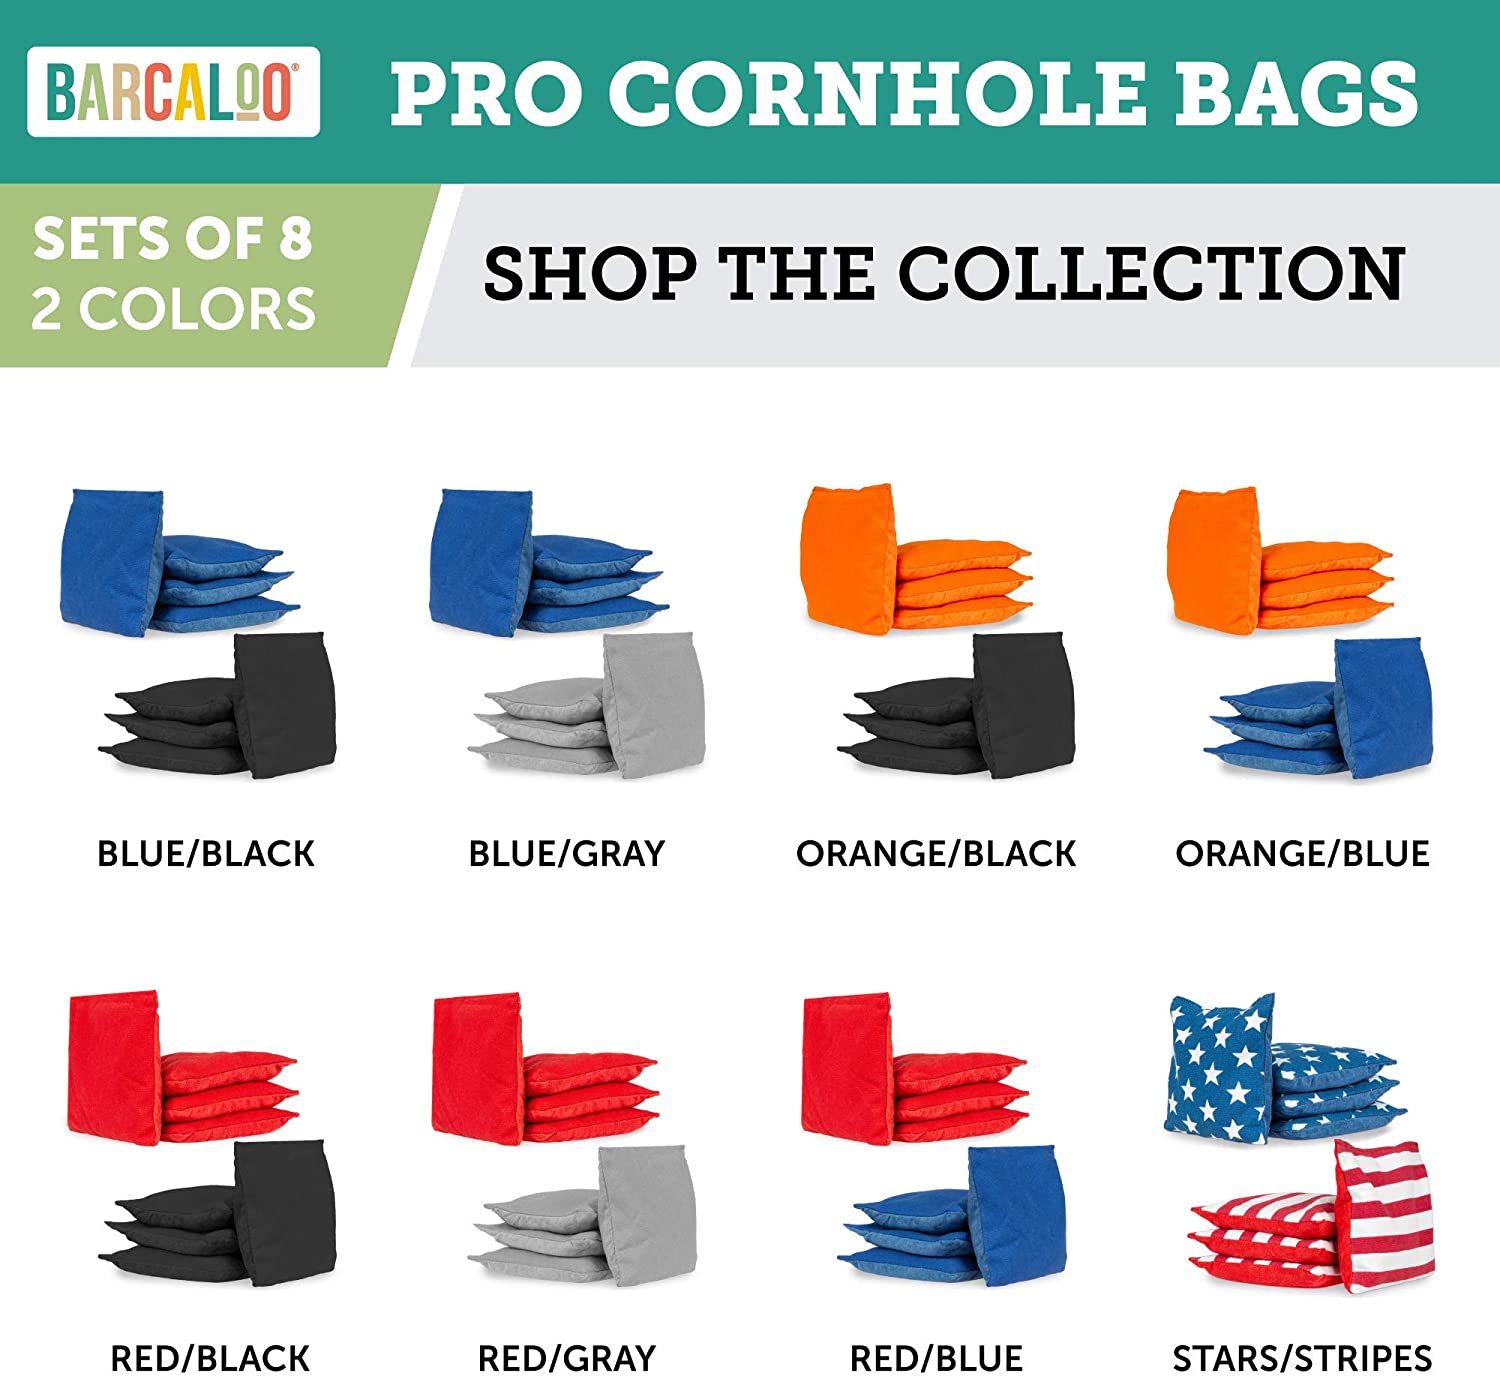 All Weather Professional Cornhole Bags - Set of 8 Regulation All Weather  Two Sided Bean Bags for Pro Corn Hole Game - 4 Red & 4 Gray